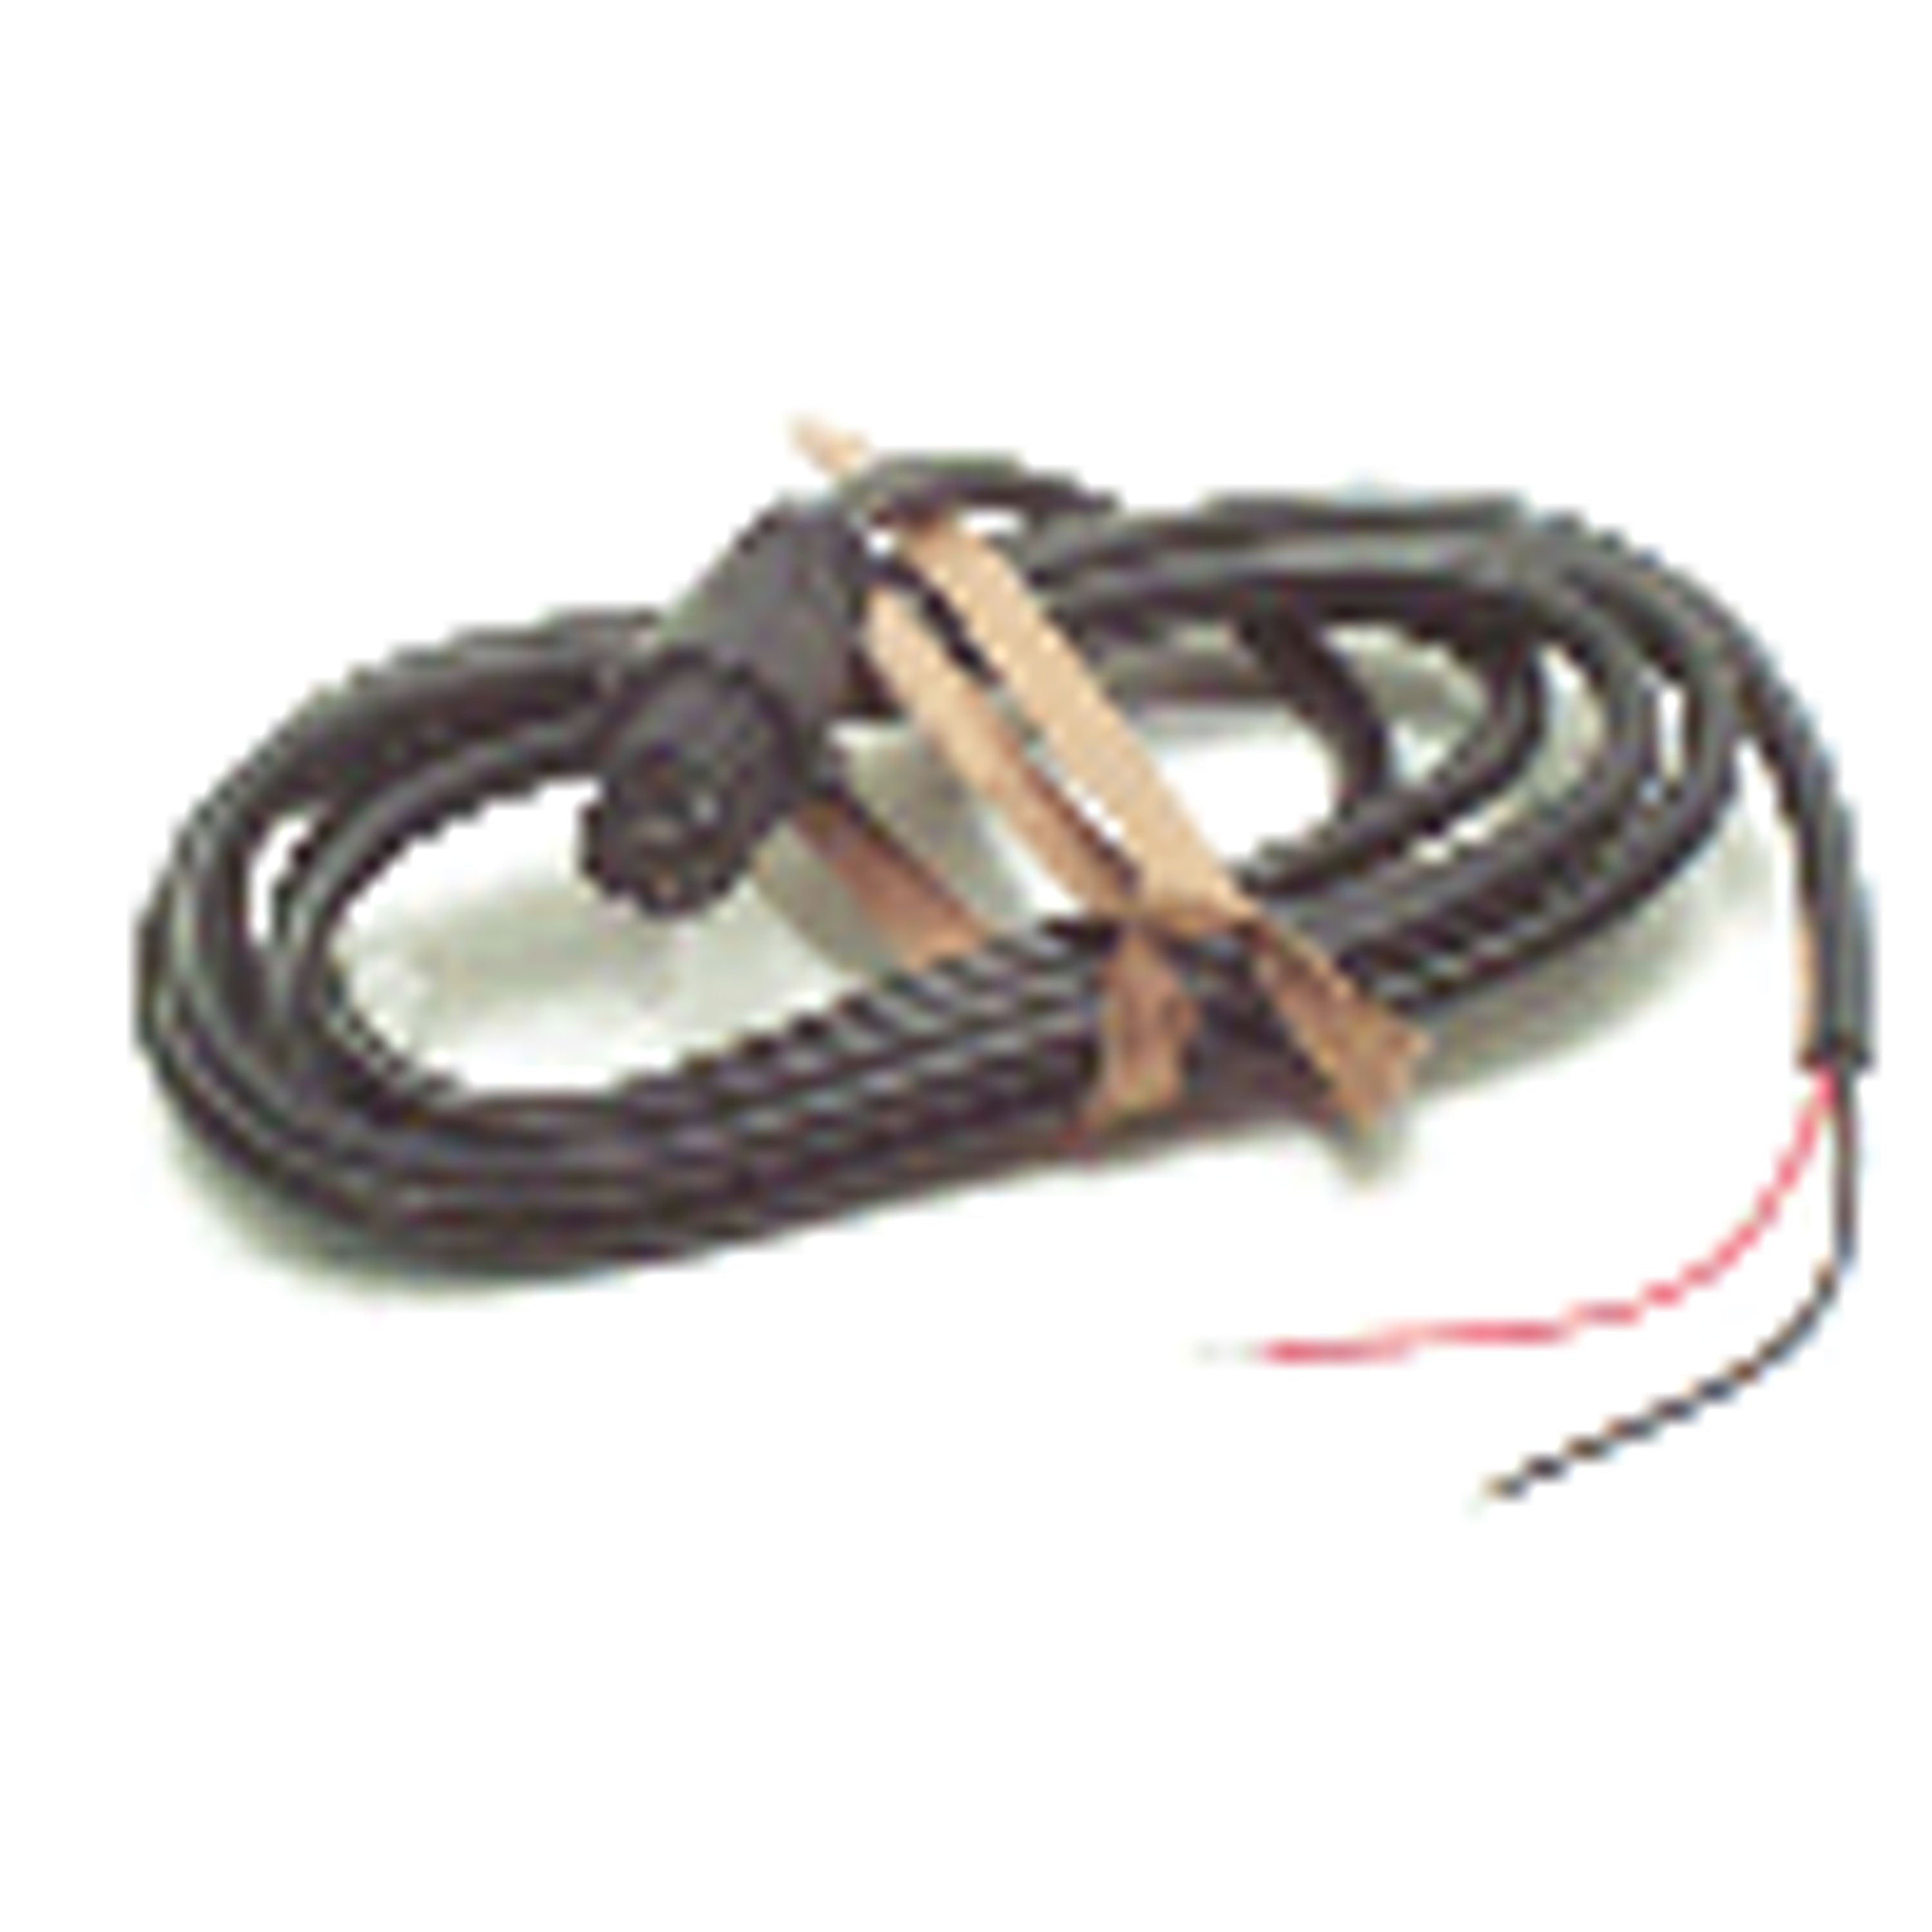 Lowrance 000-0099-83 PC-24U Power Cable for Elite-5m GPS